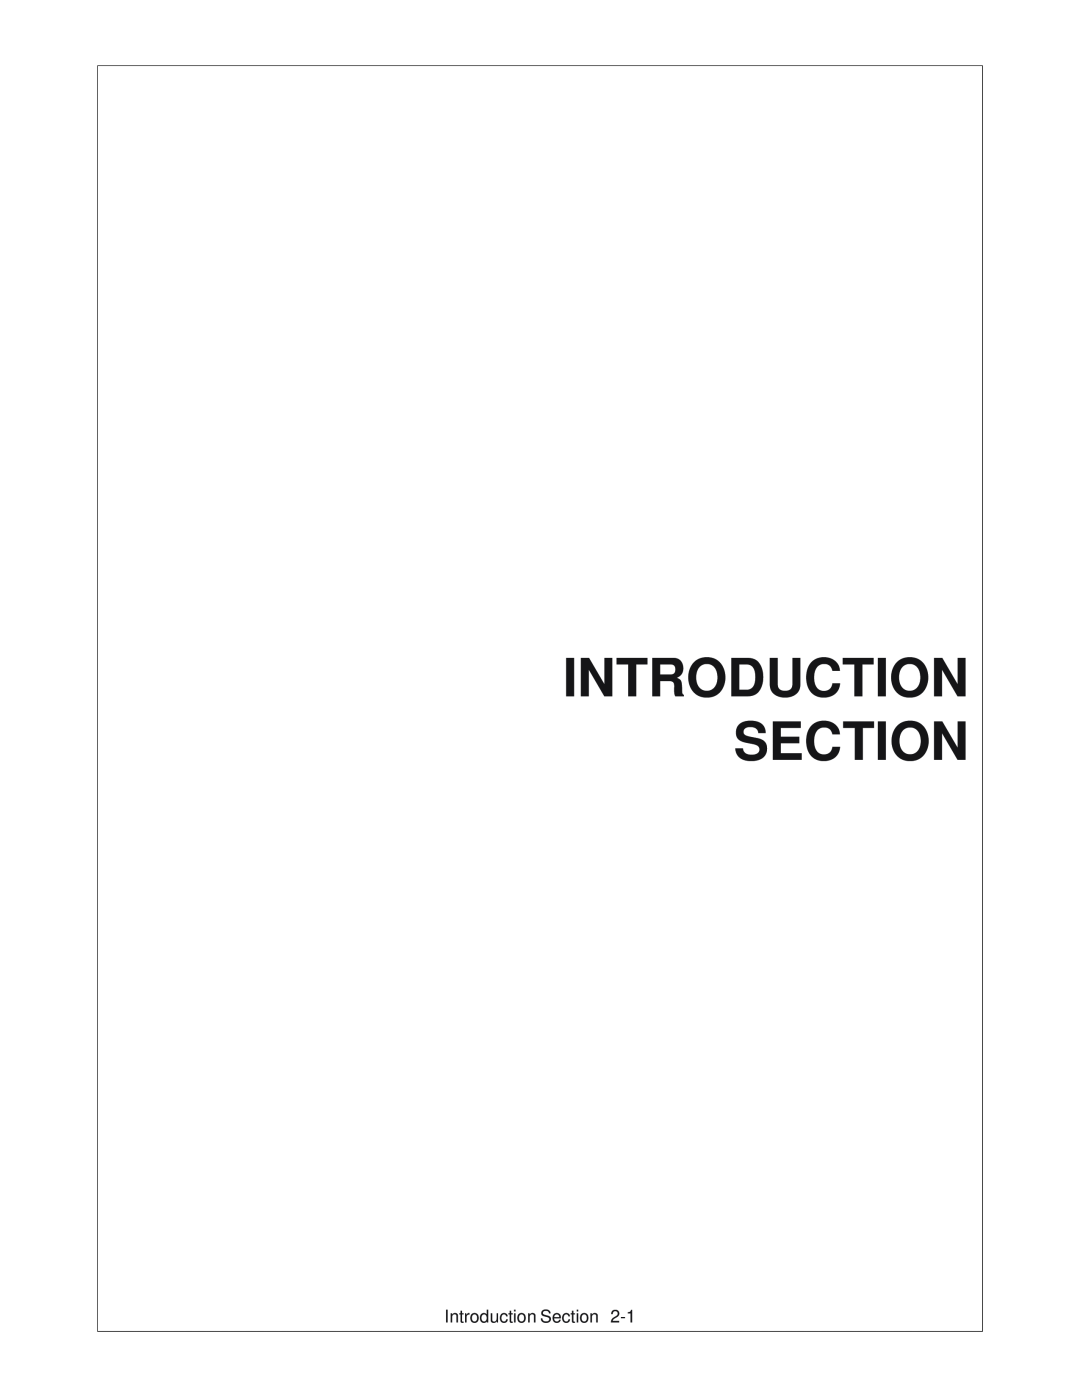 Tiger Products Co., Ltd TWR-120, TWR-180 manual Introduction Section 